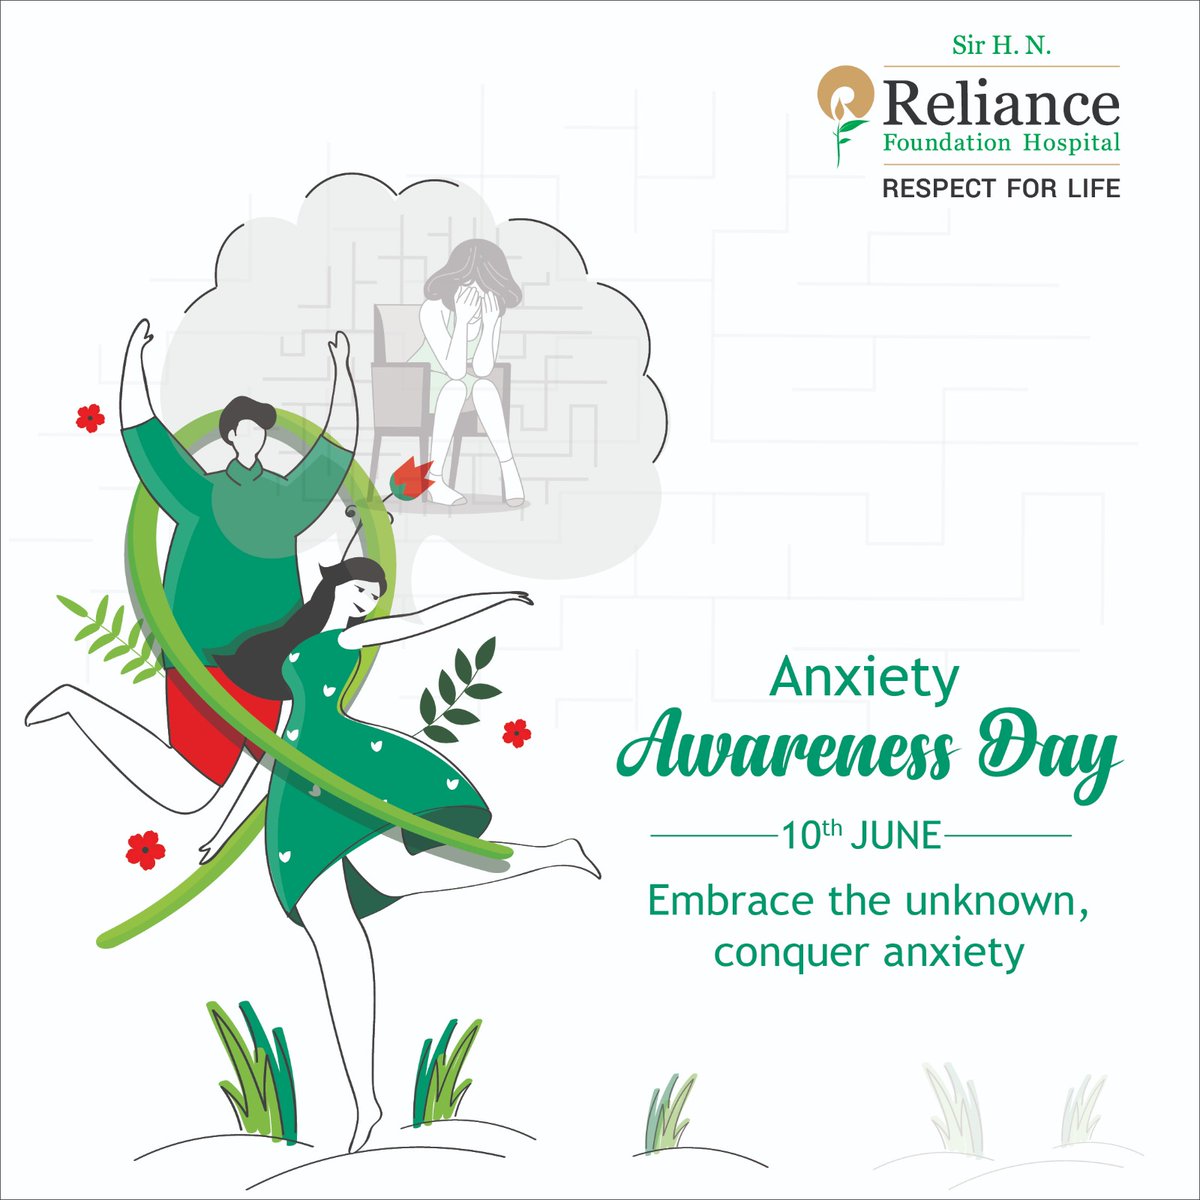 🌟 Join us in raising awareness for Anxiety Awareness Day! 🌟

Today, we stand together to shed light on the importance of mental health and offer support to those battling anxiety. 💙

#RelianceFoundationHospital #AnxietyAwarenessDay #Anxiety #MentalHealthMatters